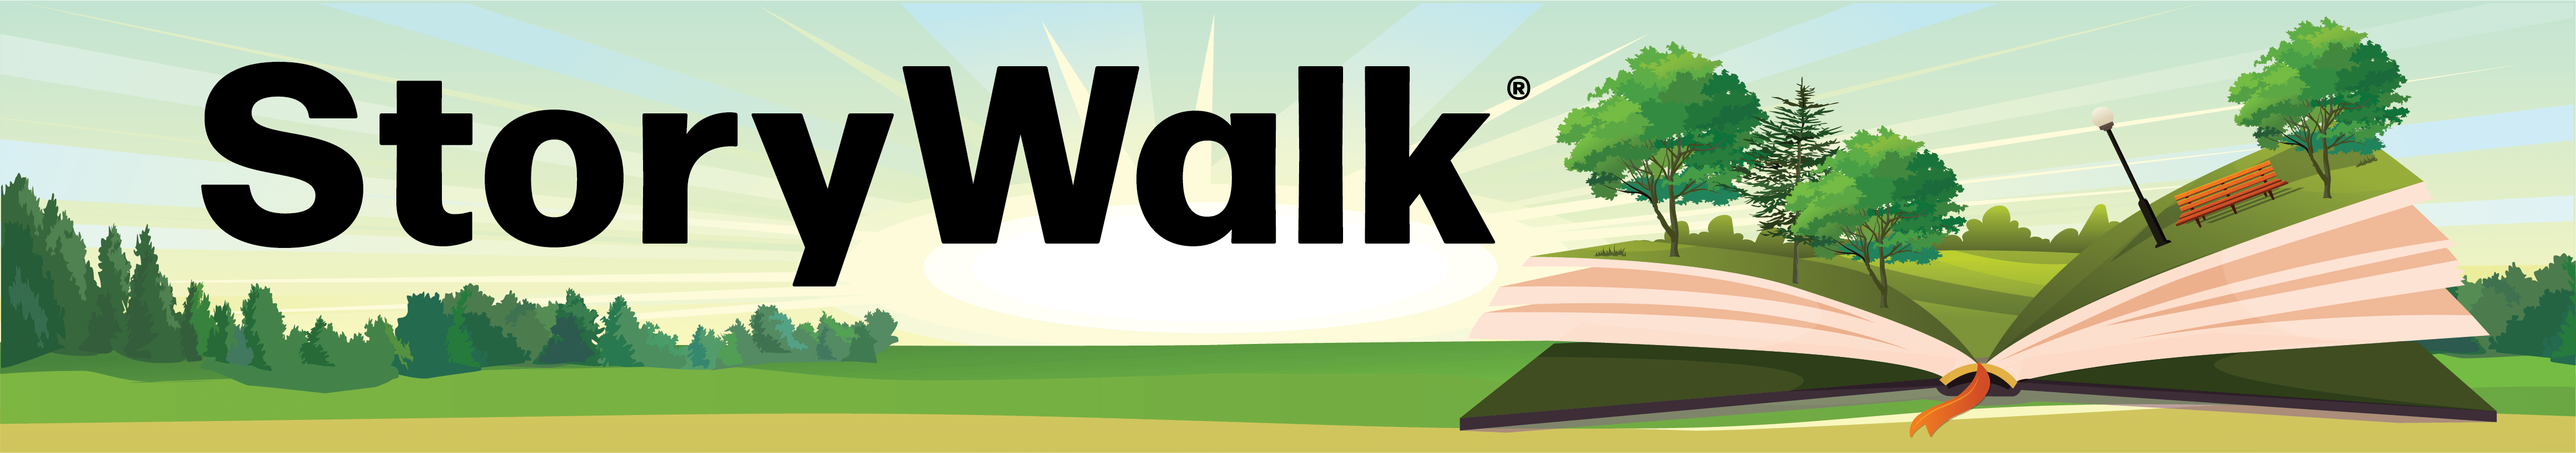 The text StoryWalk® on a background showing a park coming out of an open book.